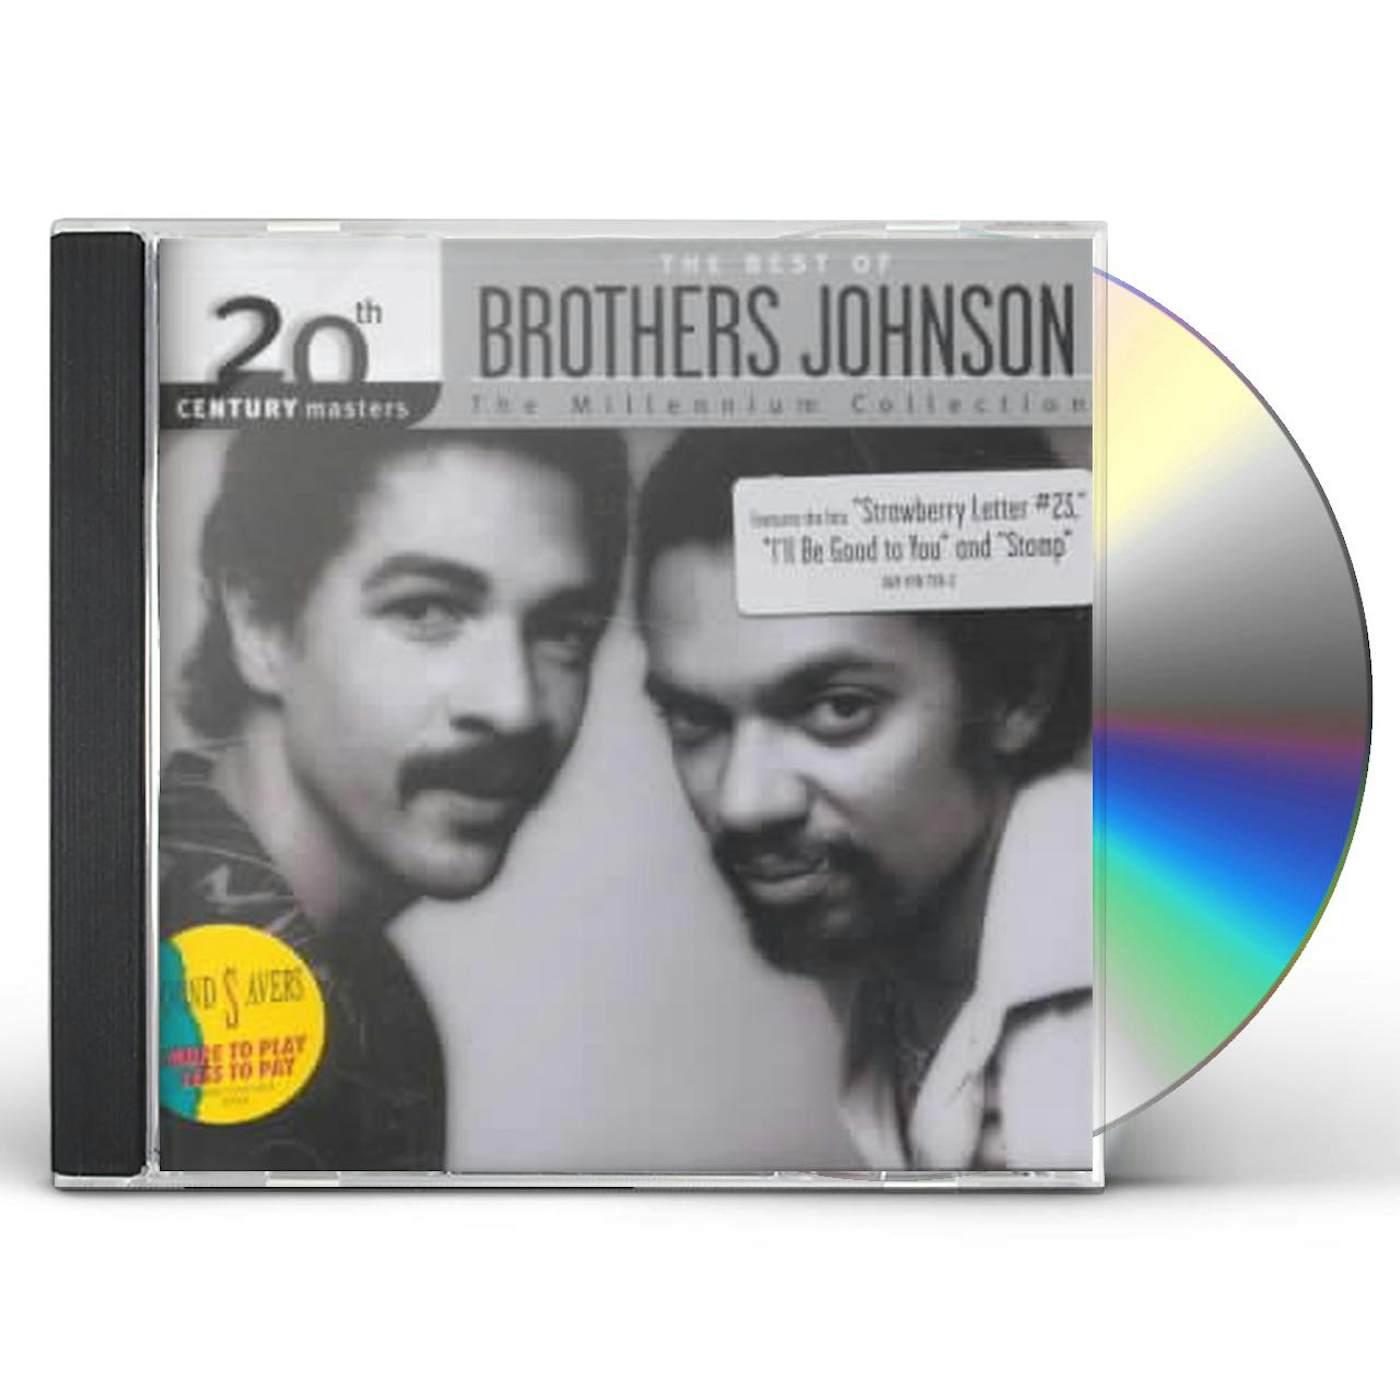 The Brothers Johnson MILLENNIUM COLLECTION: 20TH CENTURY MASTERS CD